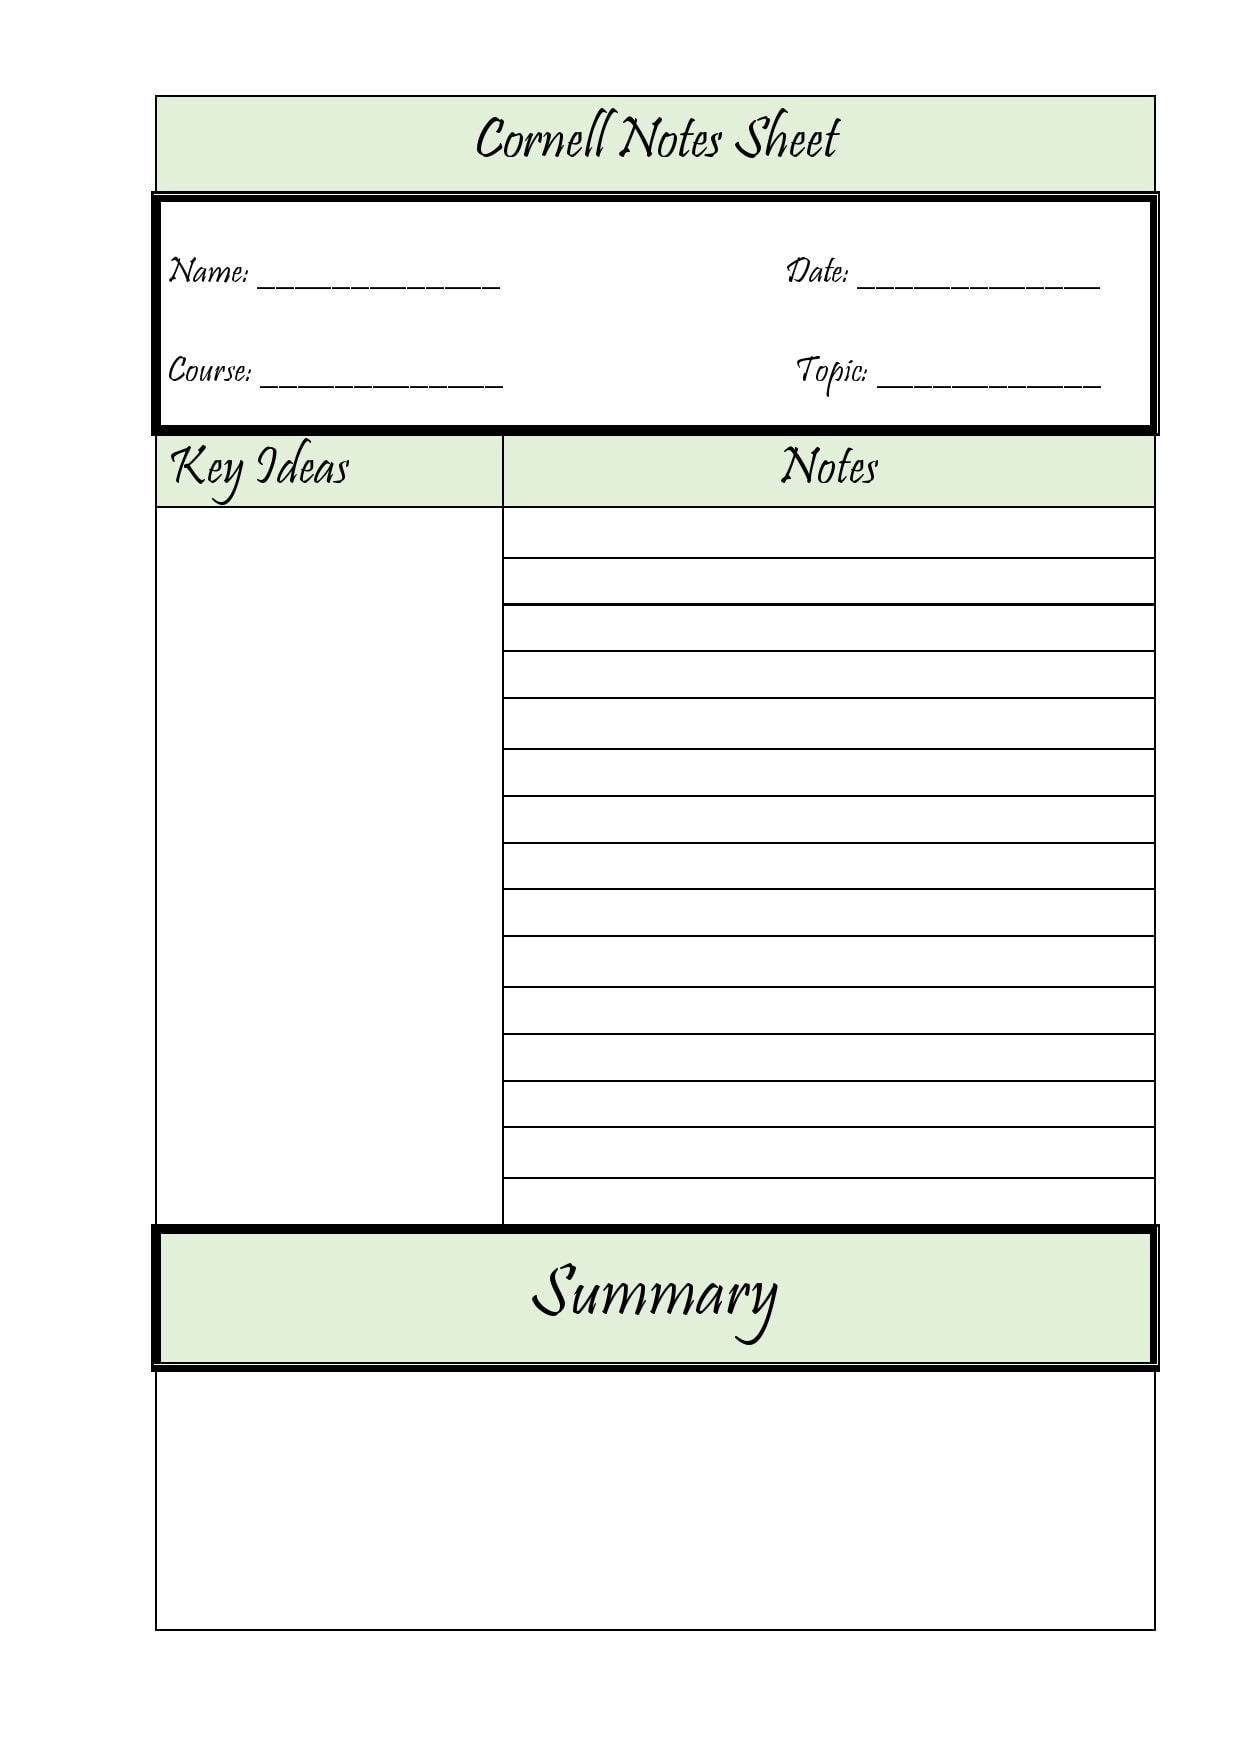 11 Printable Cornell Notes Templates [Free] - TemplateArchive For Cornell Note Template Word